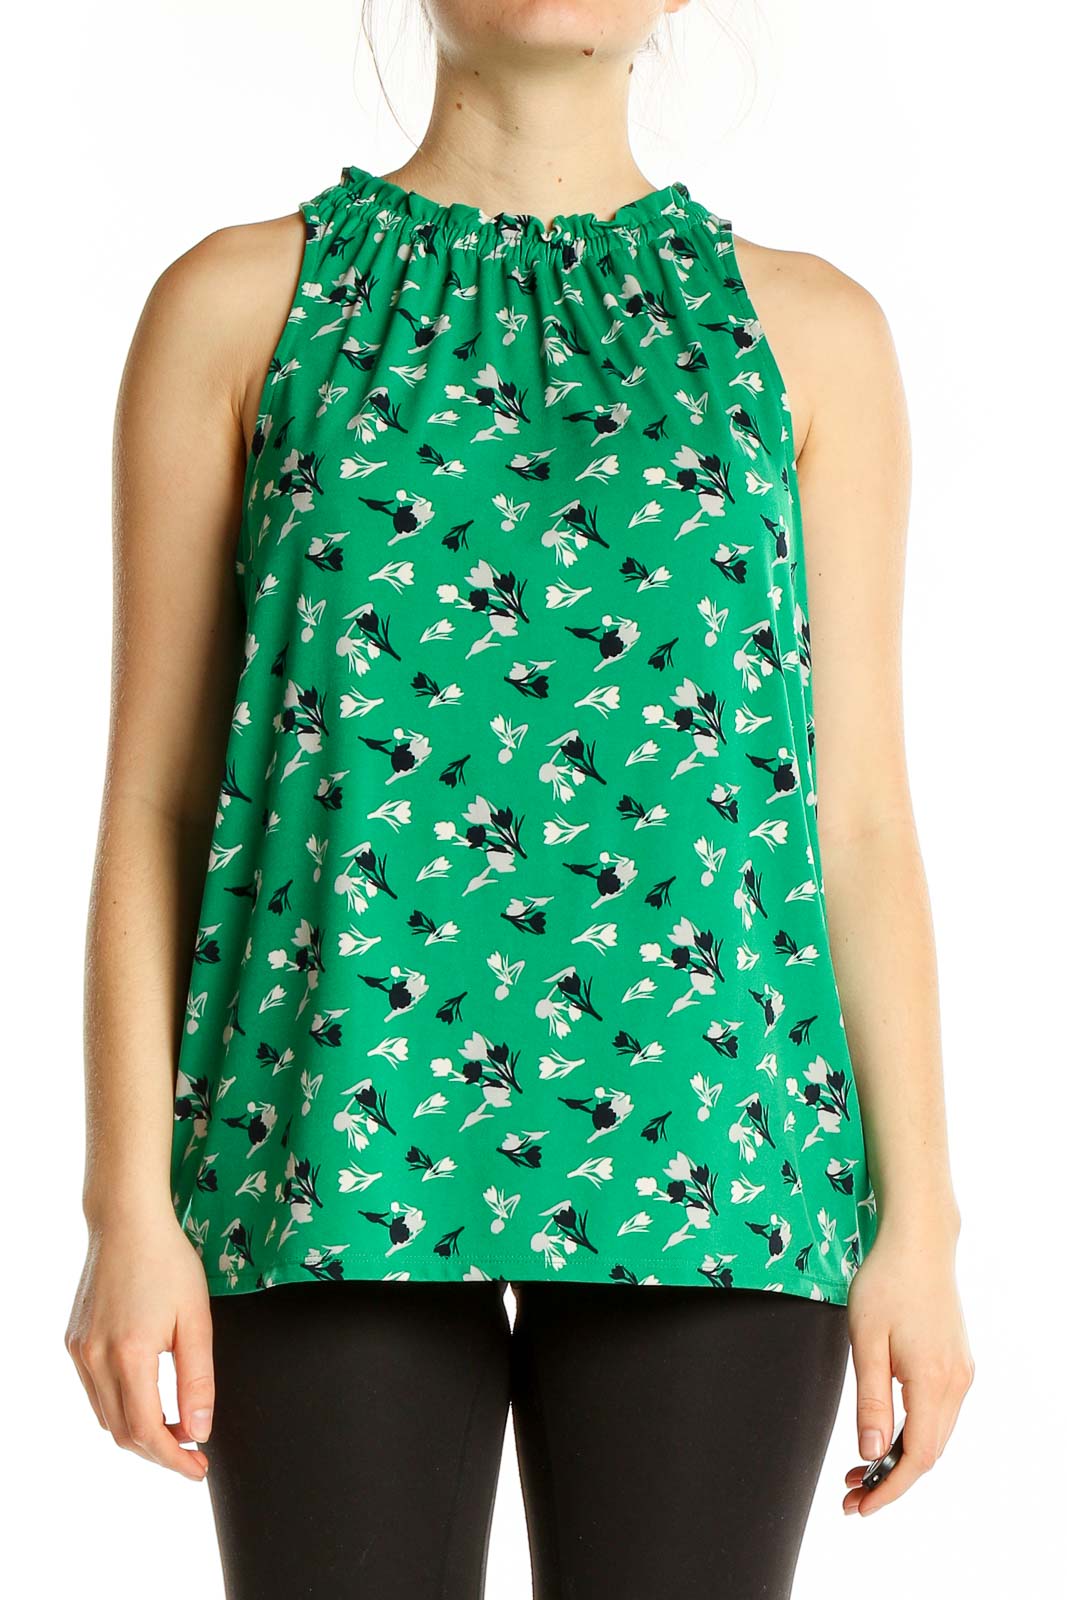 Green Sleeveless Floral Print Top Front